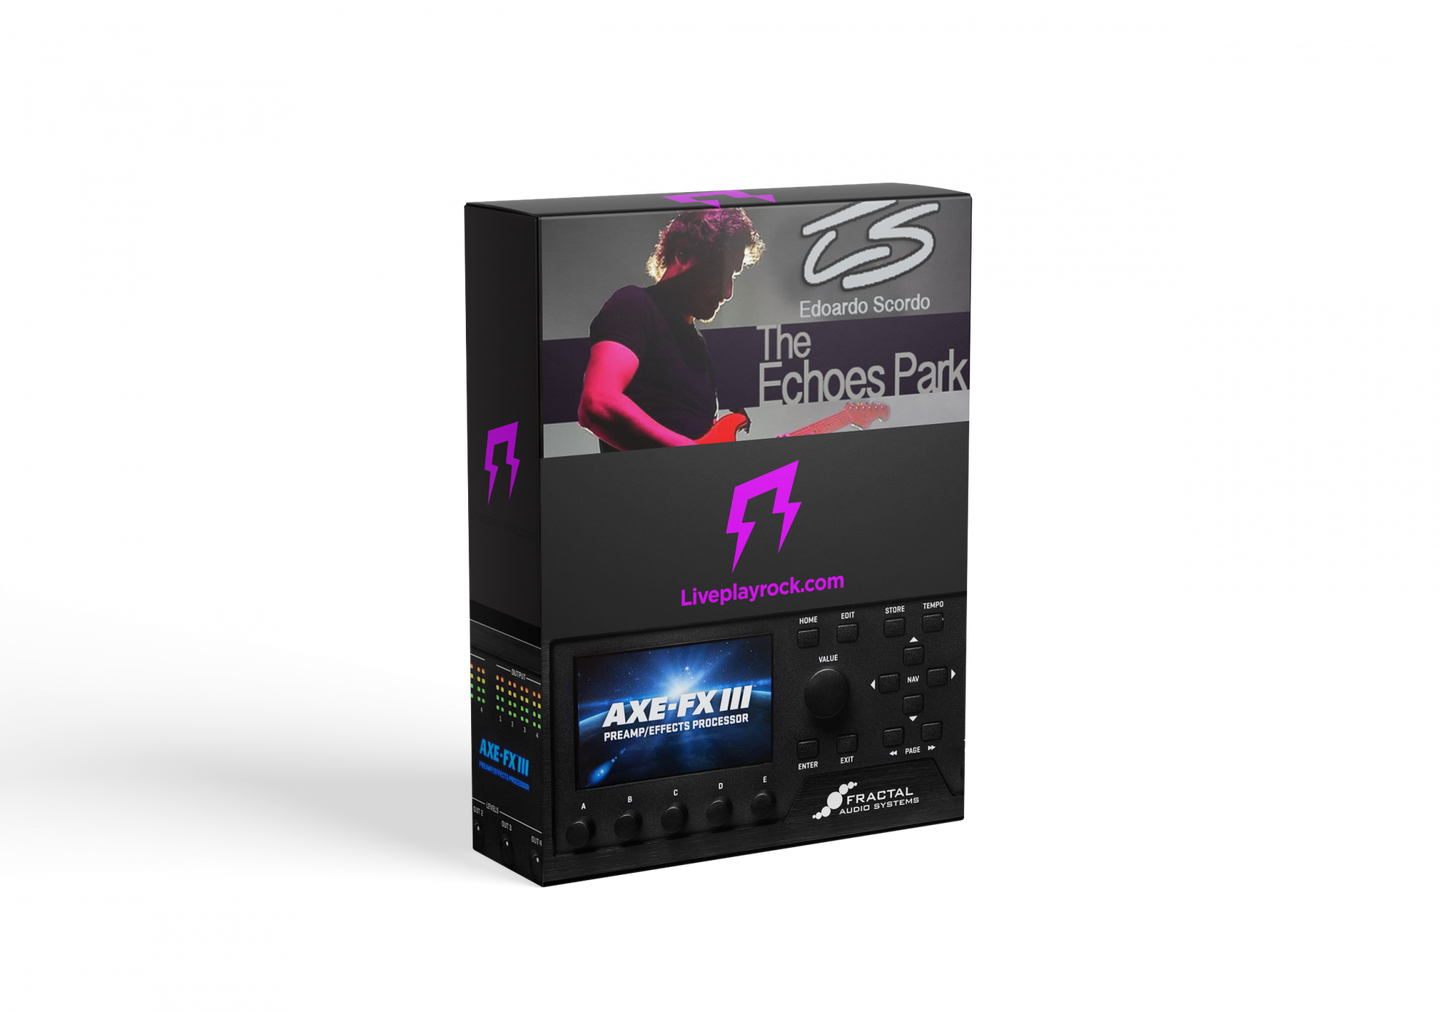 The Echoes Park Axe-Fx III presets